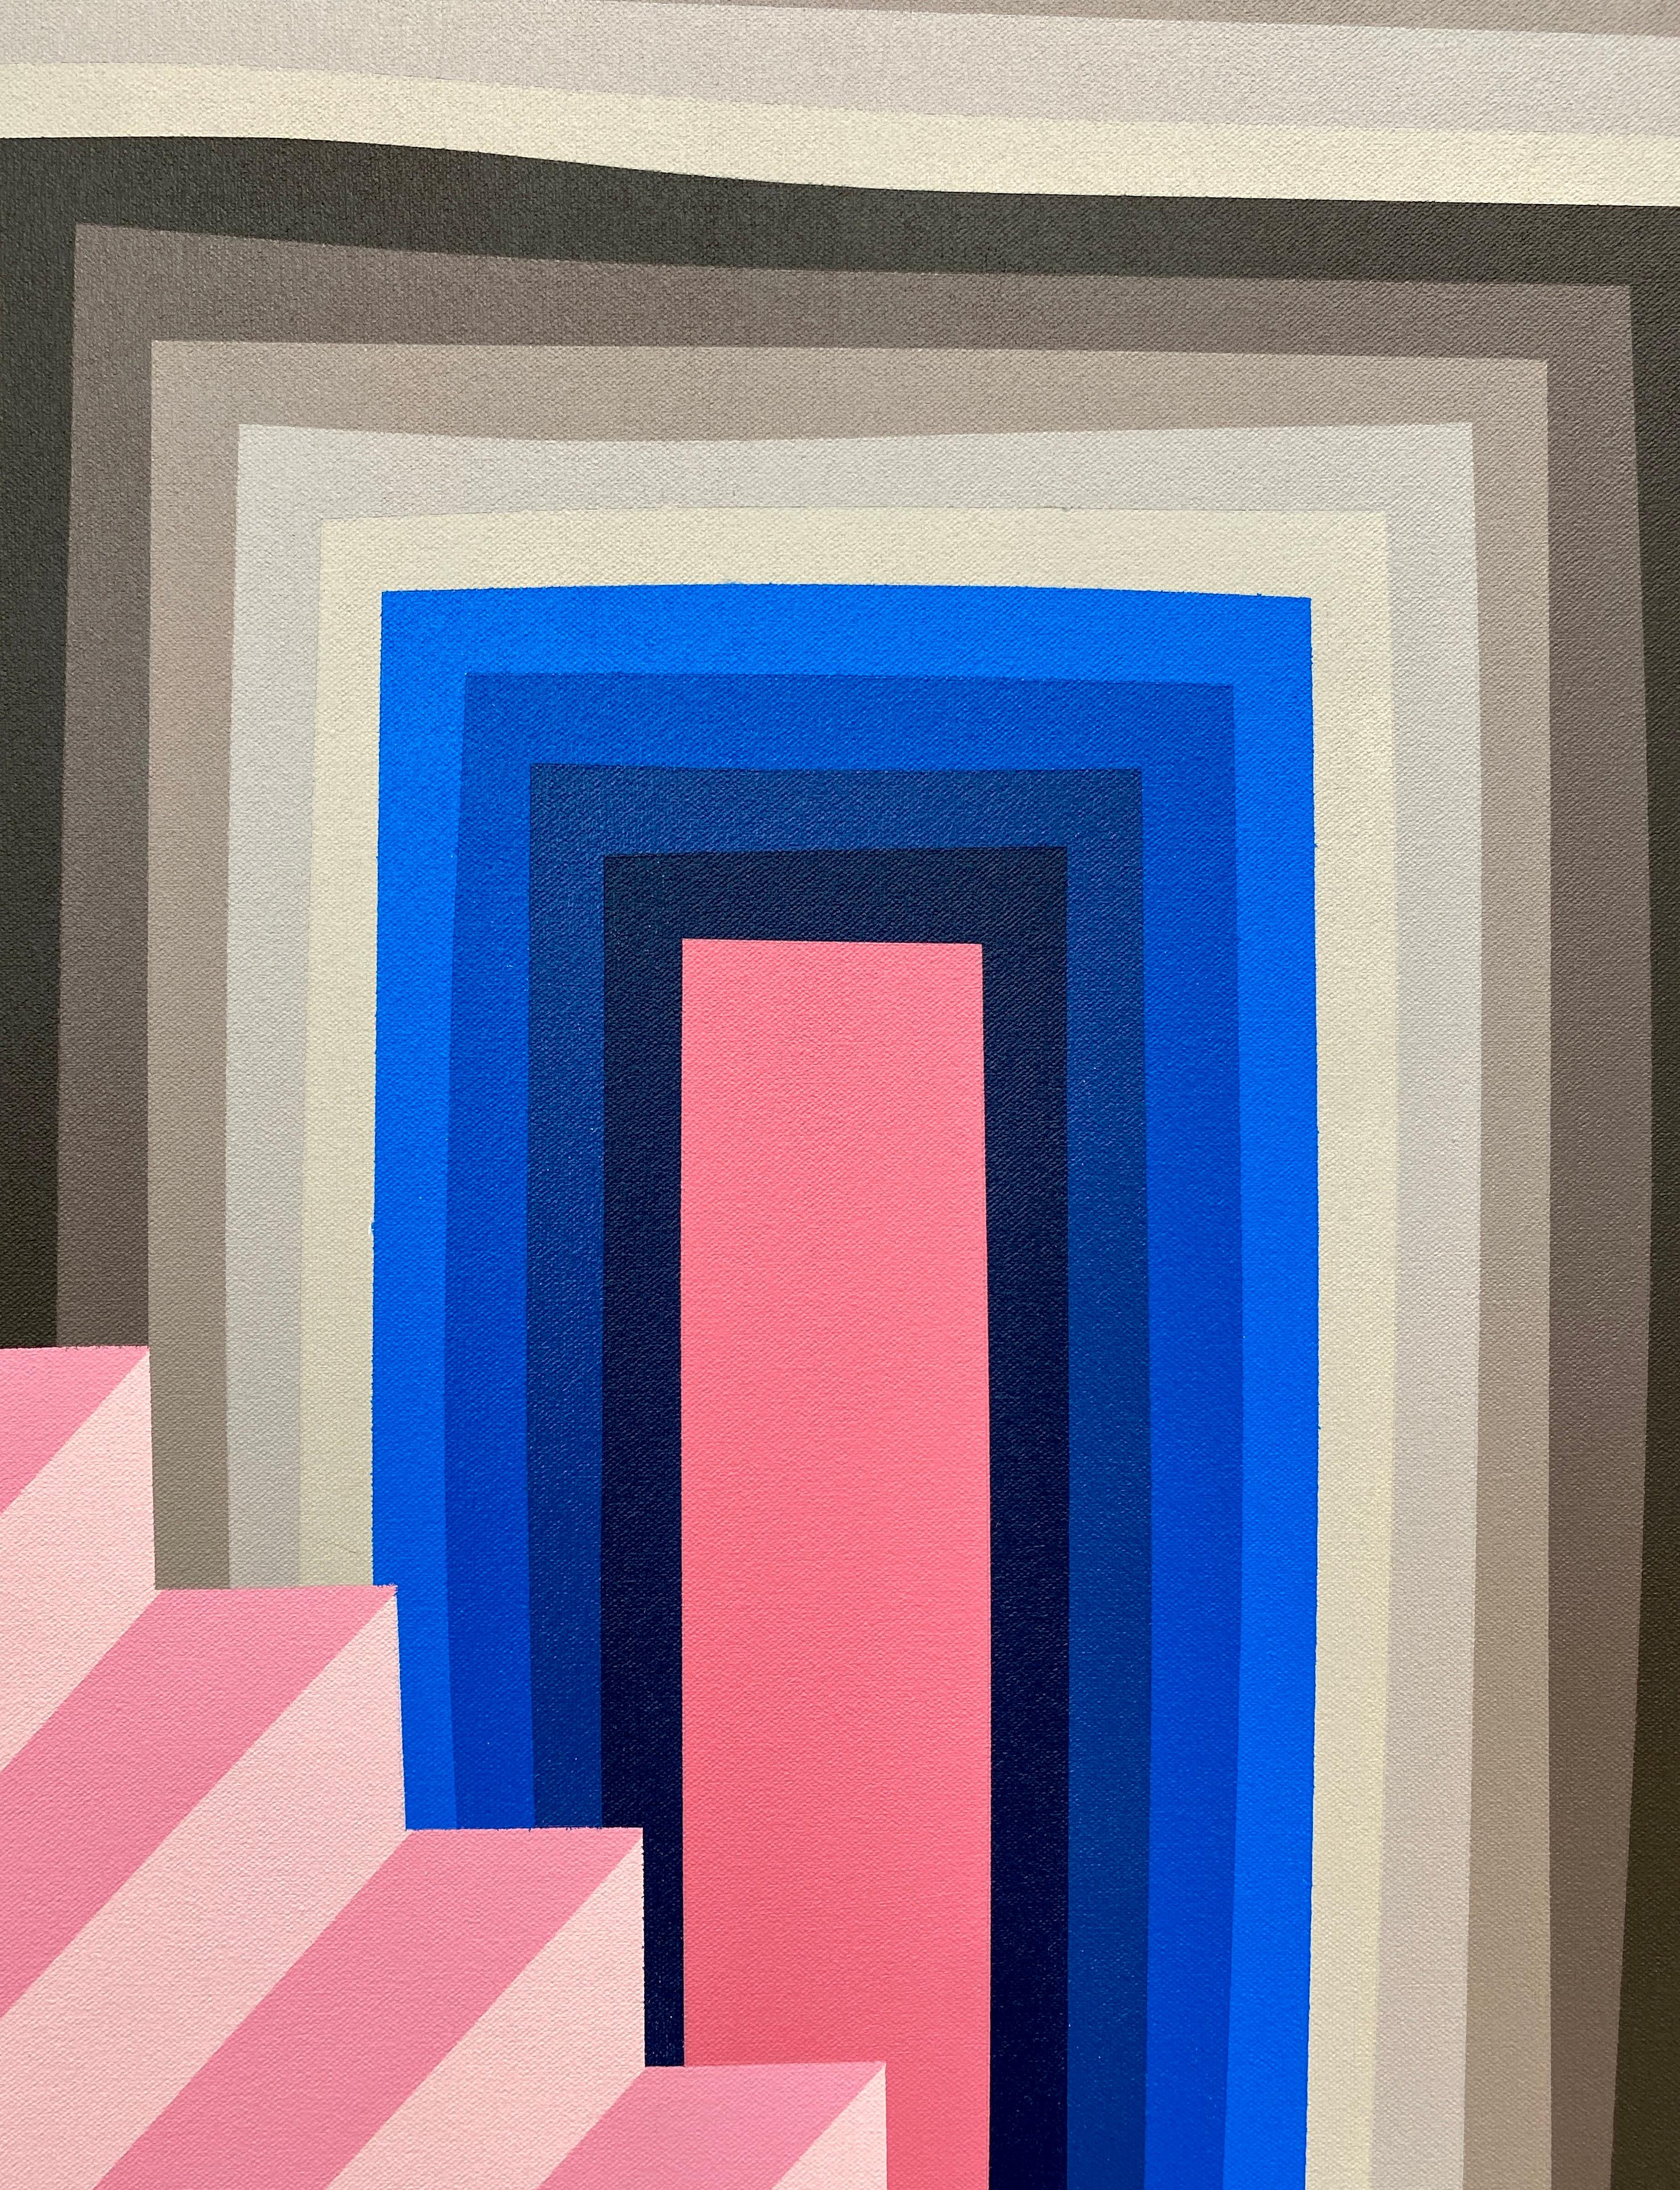 A 2022 geometric abstract painting by Christopher Cascio measuring 50 inches tall by 40 inches wide. This acrylic painting on canvas depicts abstracted portal. The artist describes the work as hard-edge abstract painting, inspired by traditional